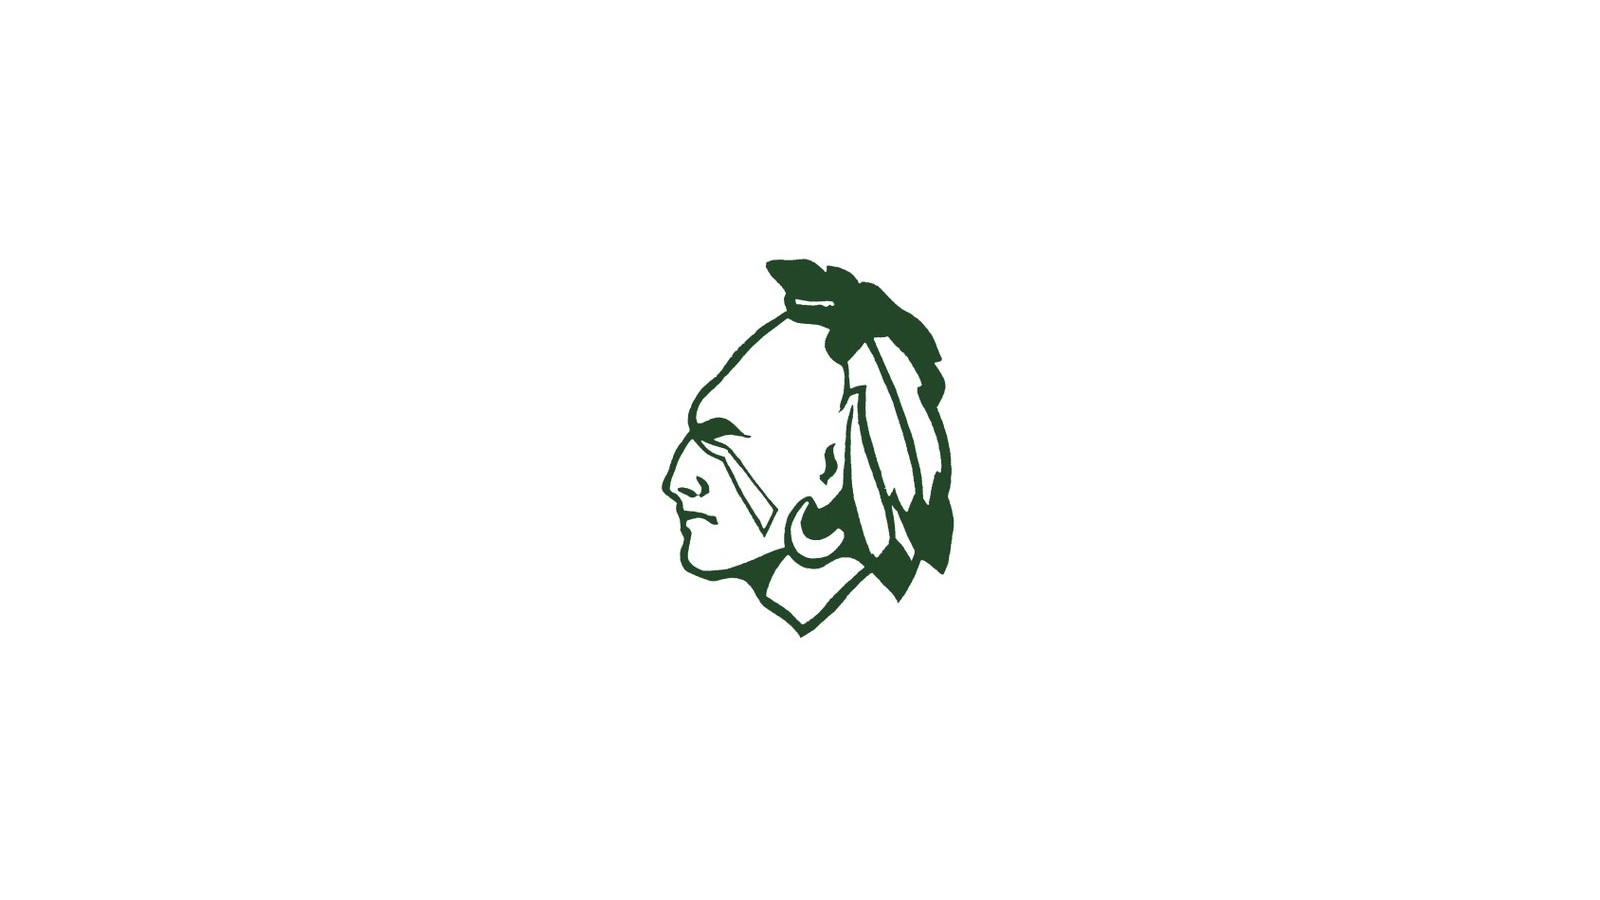 Dartmouth will hold town referendum on high school’s Indian logo